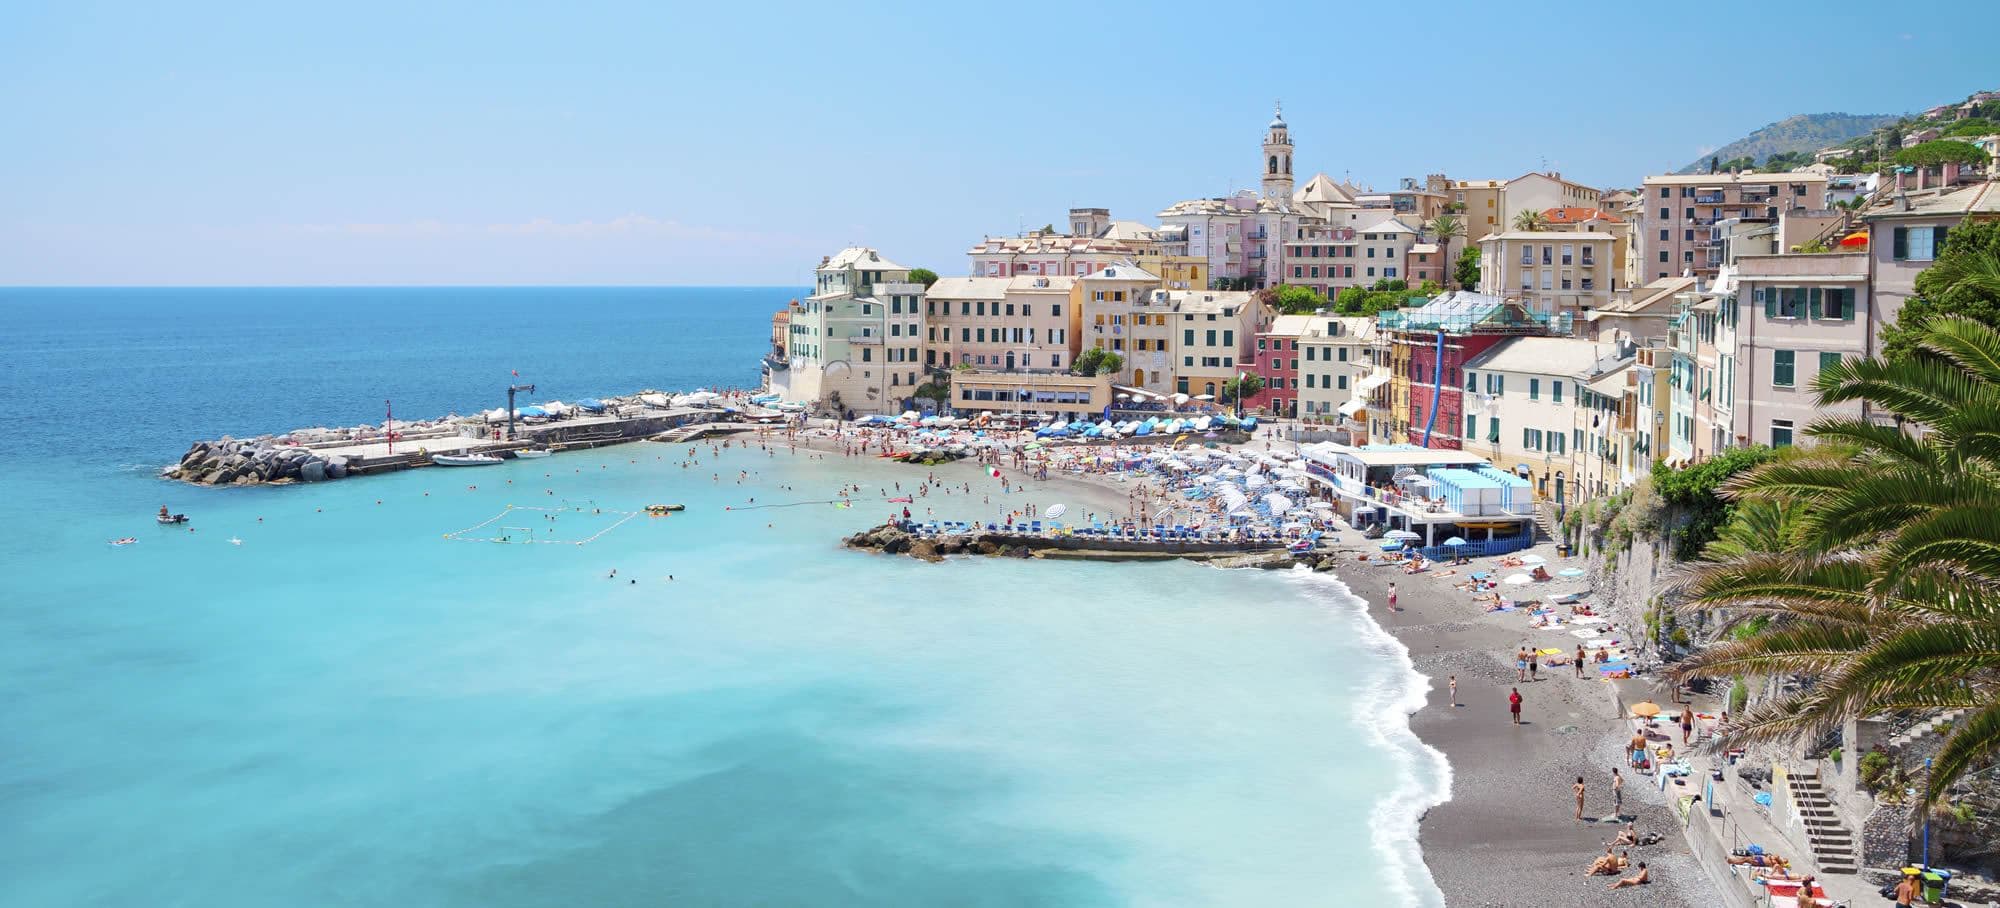 Family Hotels In Liguria Family Holidays In Italy